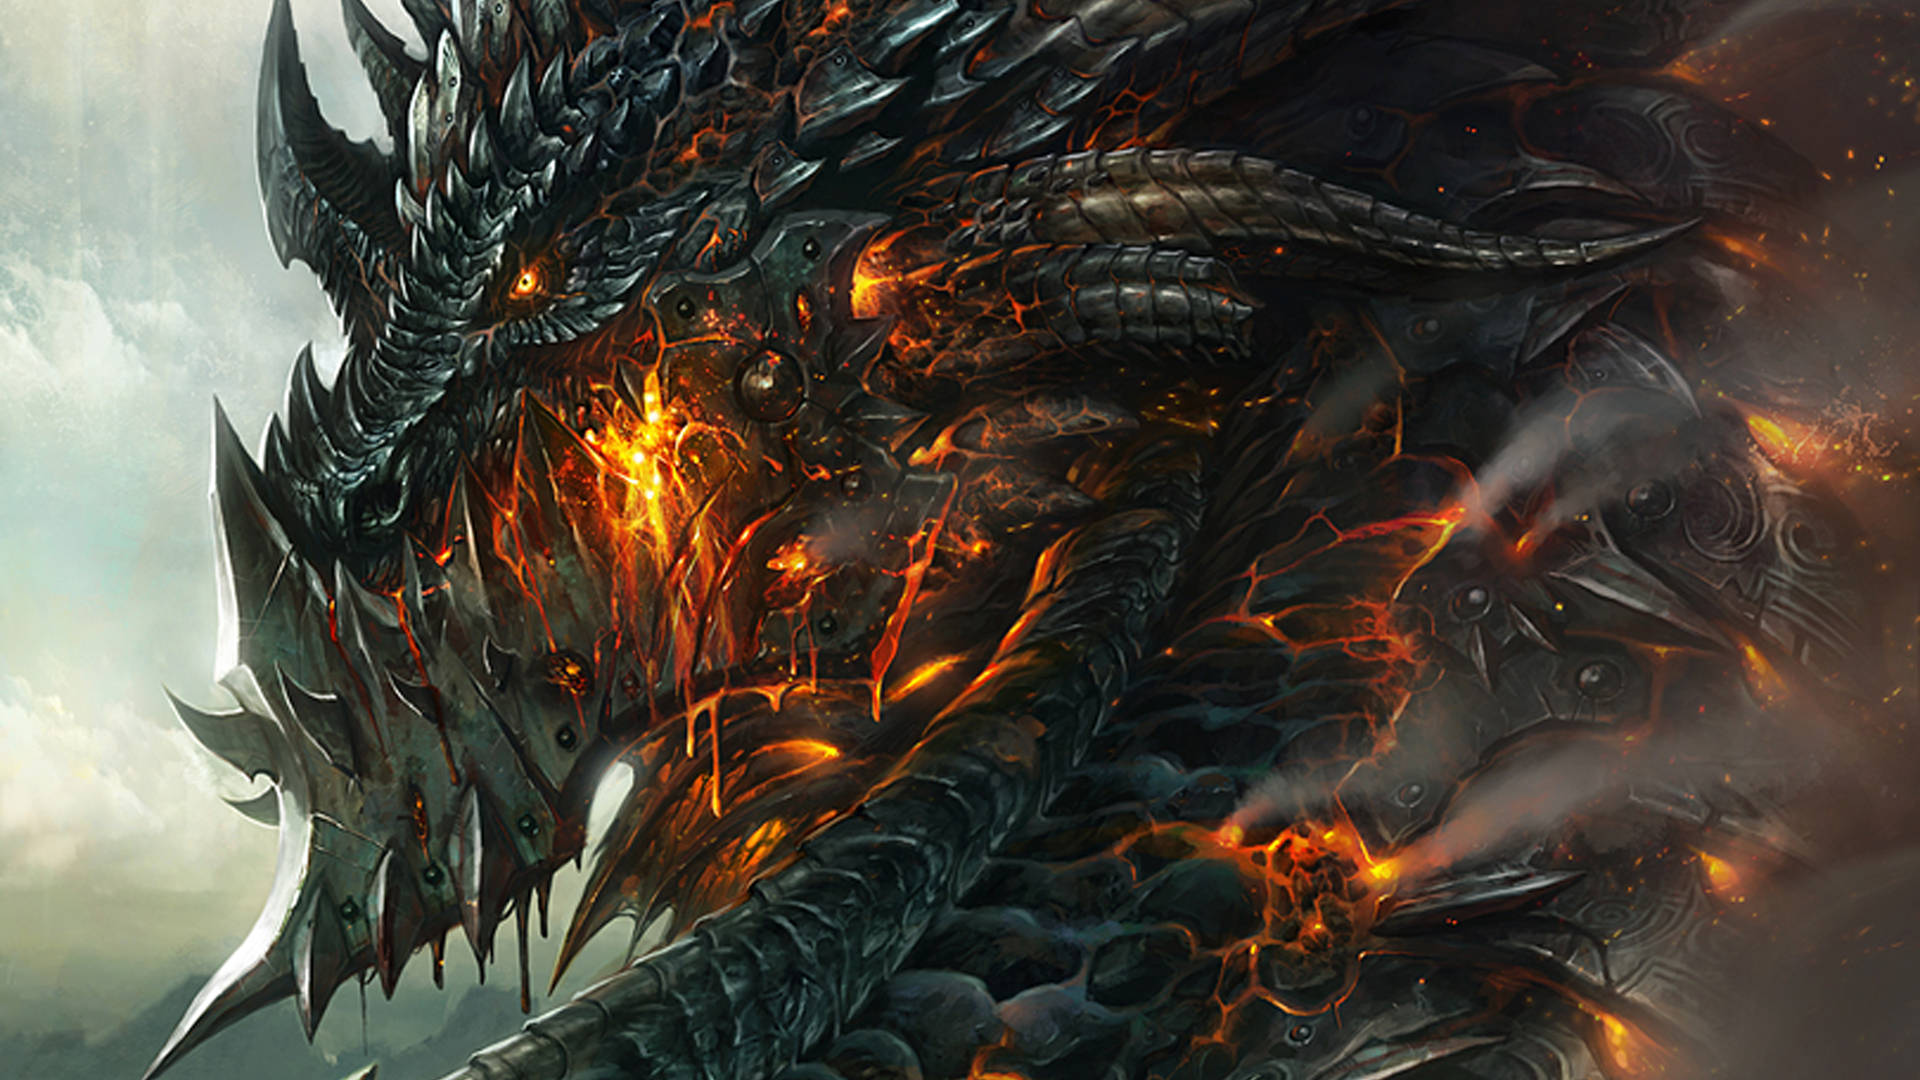 The Coolest Dragon with Fire Power Wallpaper